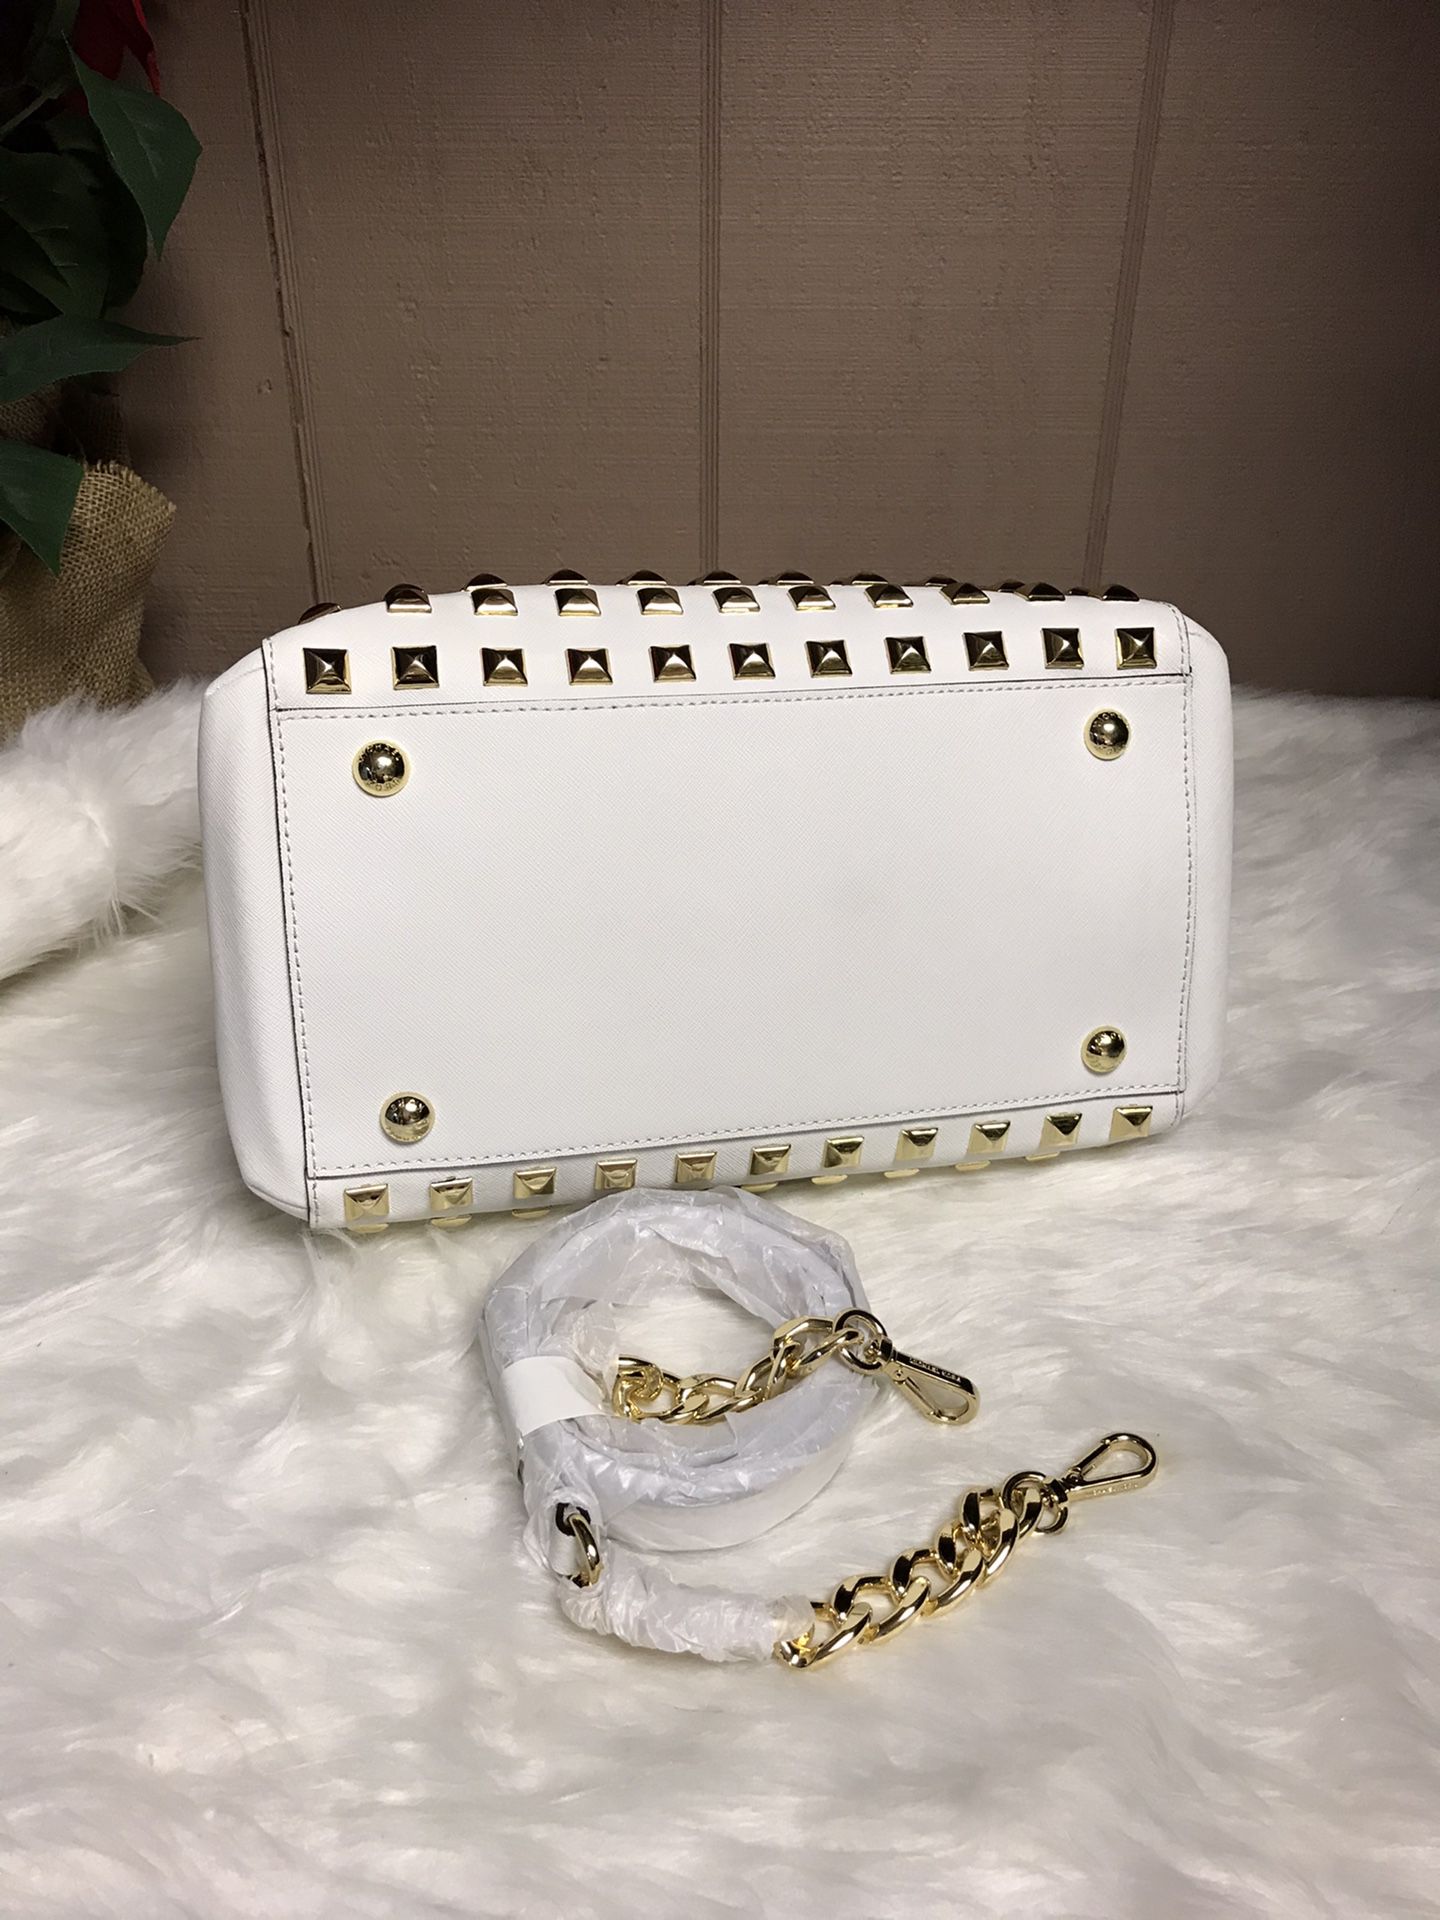 Michael Kors Rivington Stud Large Leather Wallet Turnlock Bright Red for  Sale in Pearl City, HI - OfferUp